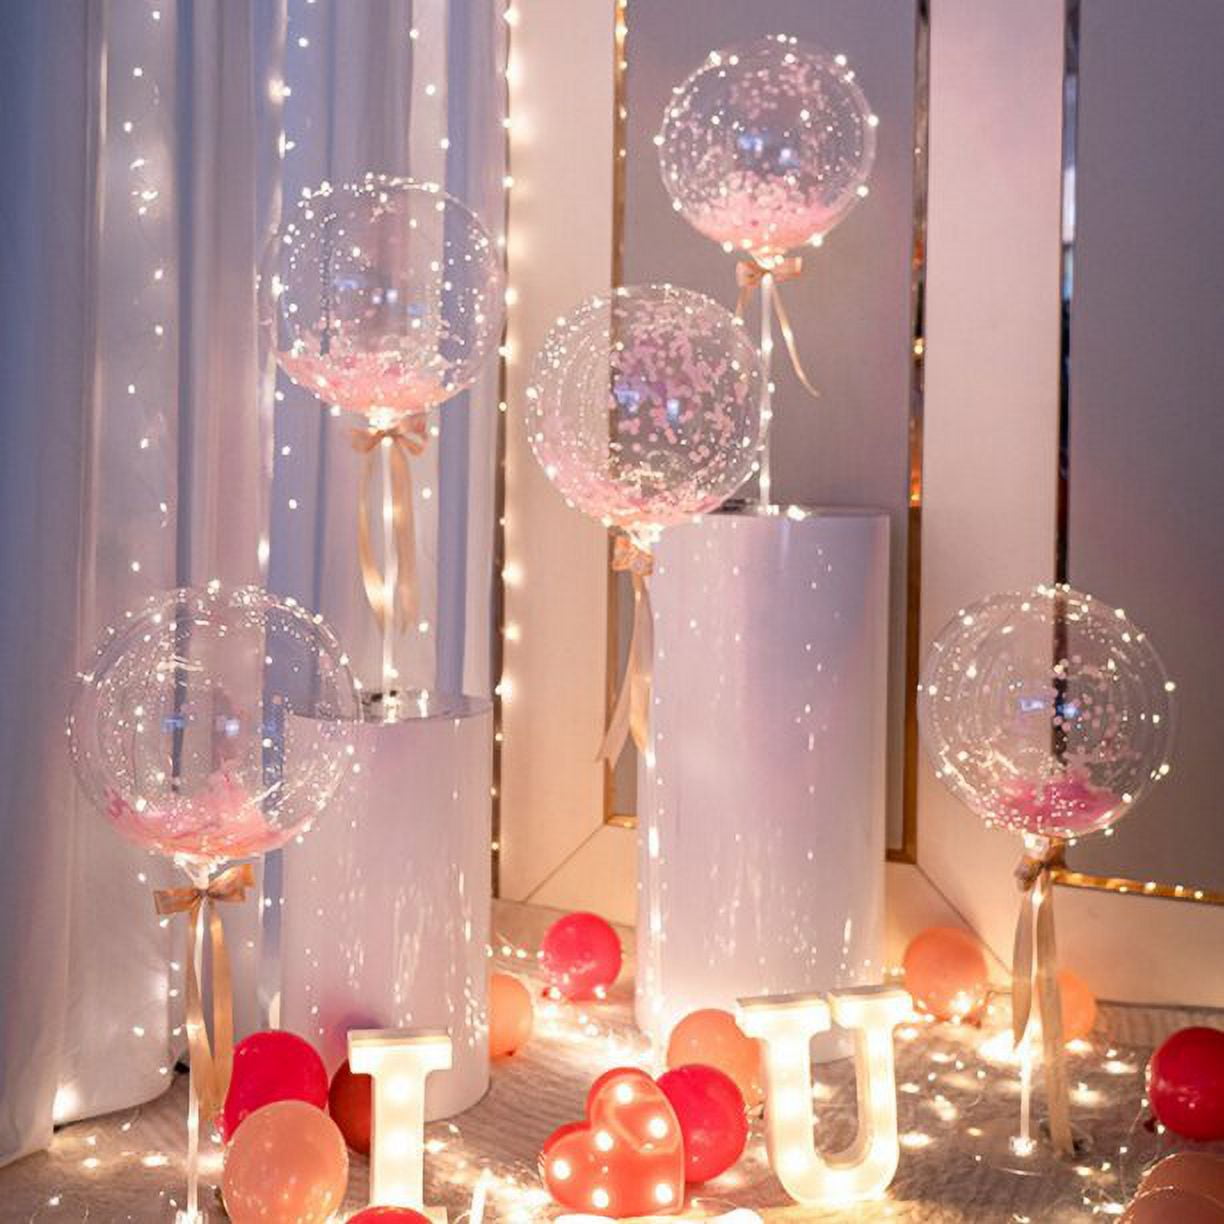 25 PCs Clear Bobo Balloons 12 inches Transparent Bubble Balloon for Light  Up LED Balloons,Christmas, Party Events, Wedding, Anniversary, Indoor and